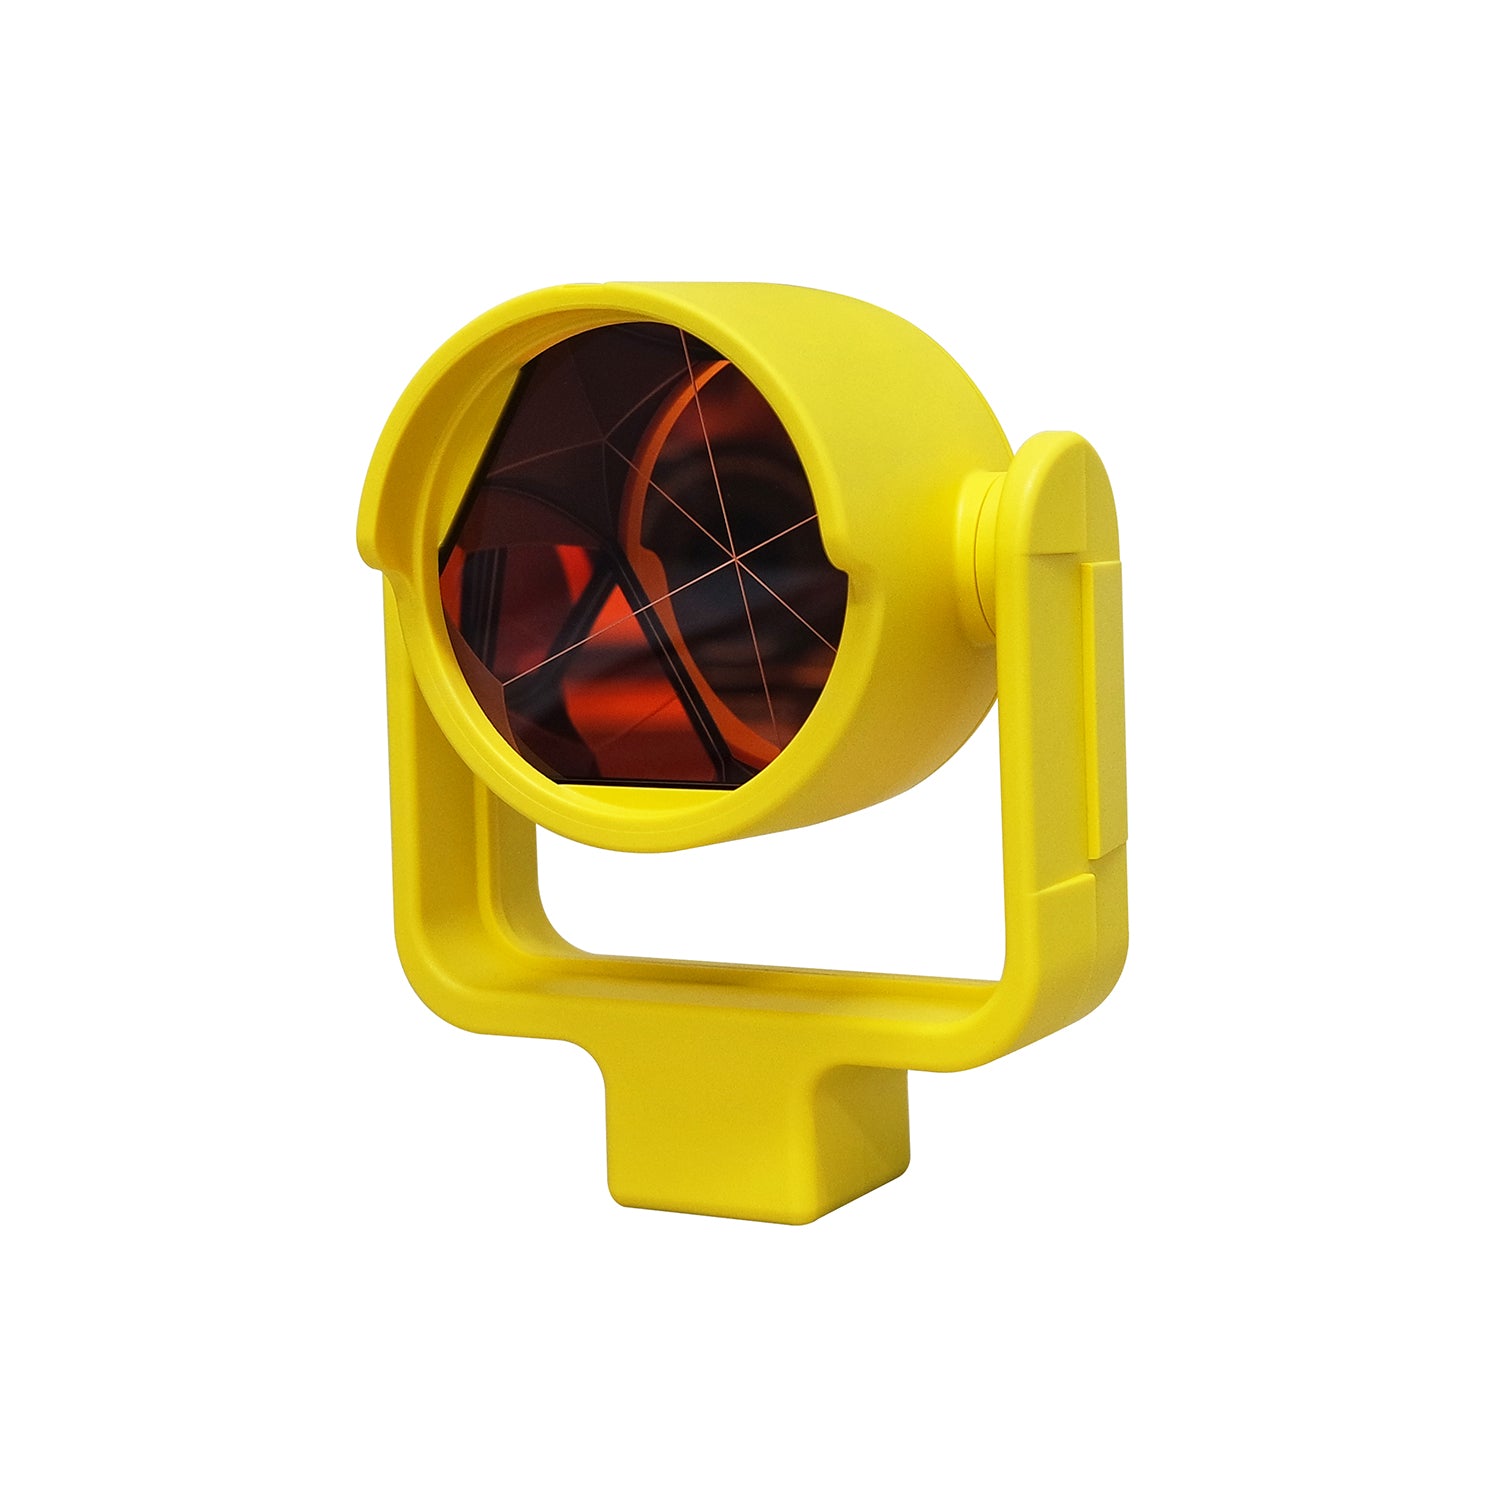 GeoMax ZPR100 Circular Prism and Holder -Prisms & Accessories- eGPS Solutions Inc.